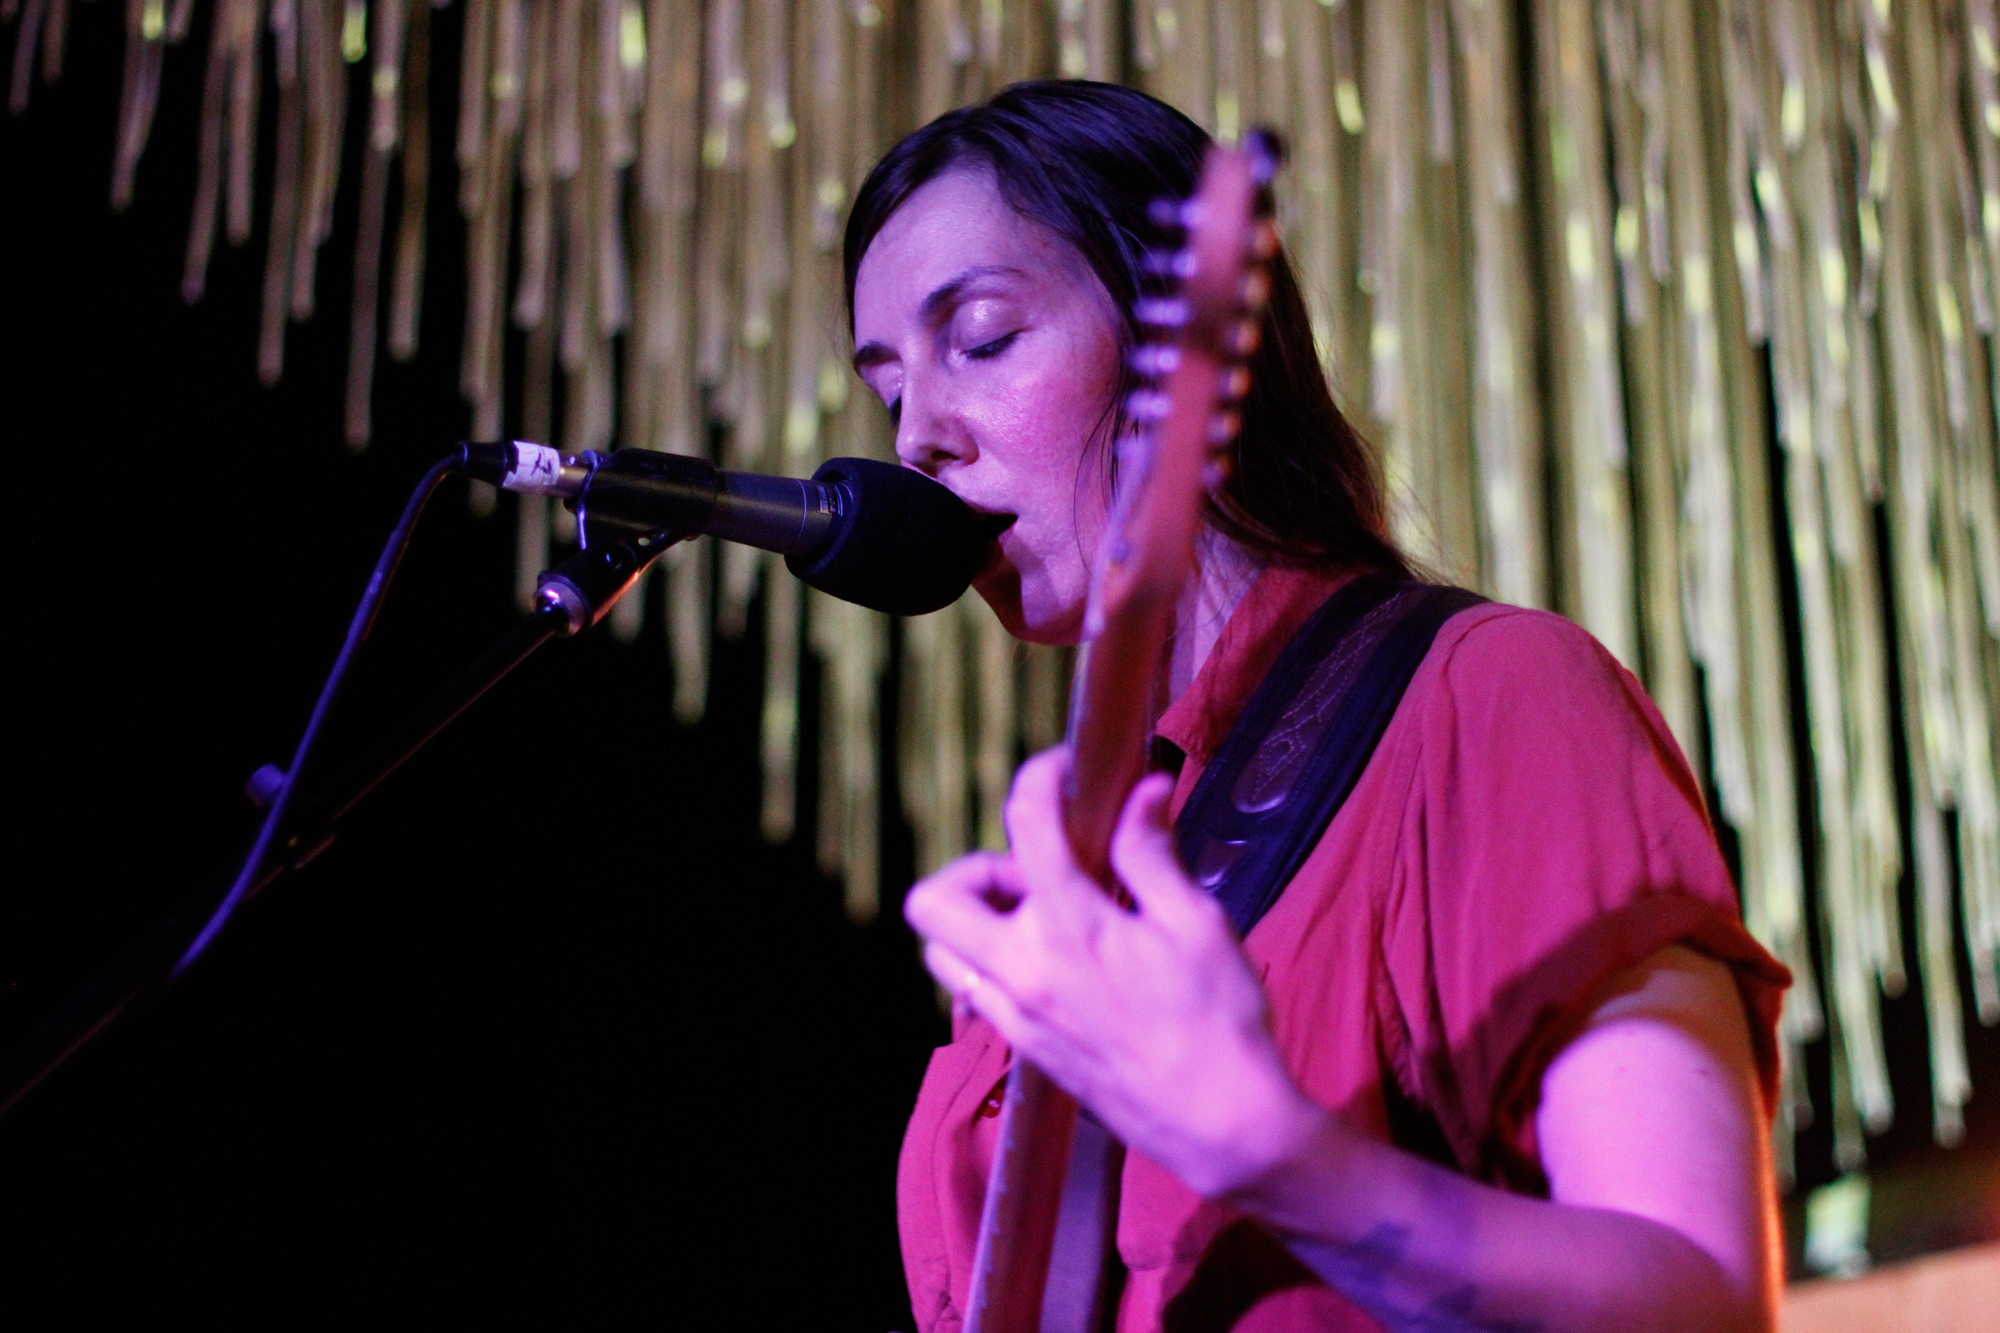 She Keeps Bees plays at Cameo Gallery in Williamsburg, Brooklyn, NY on Aug. 21, 2014.